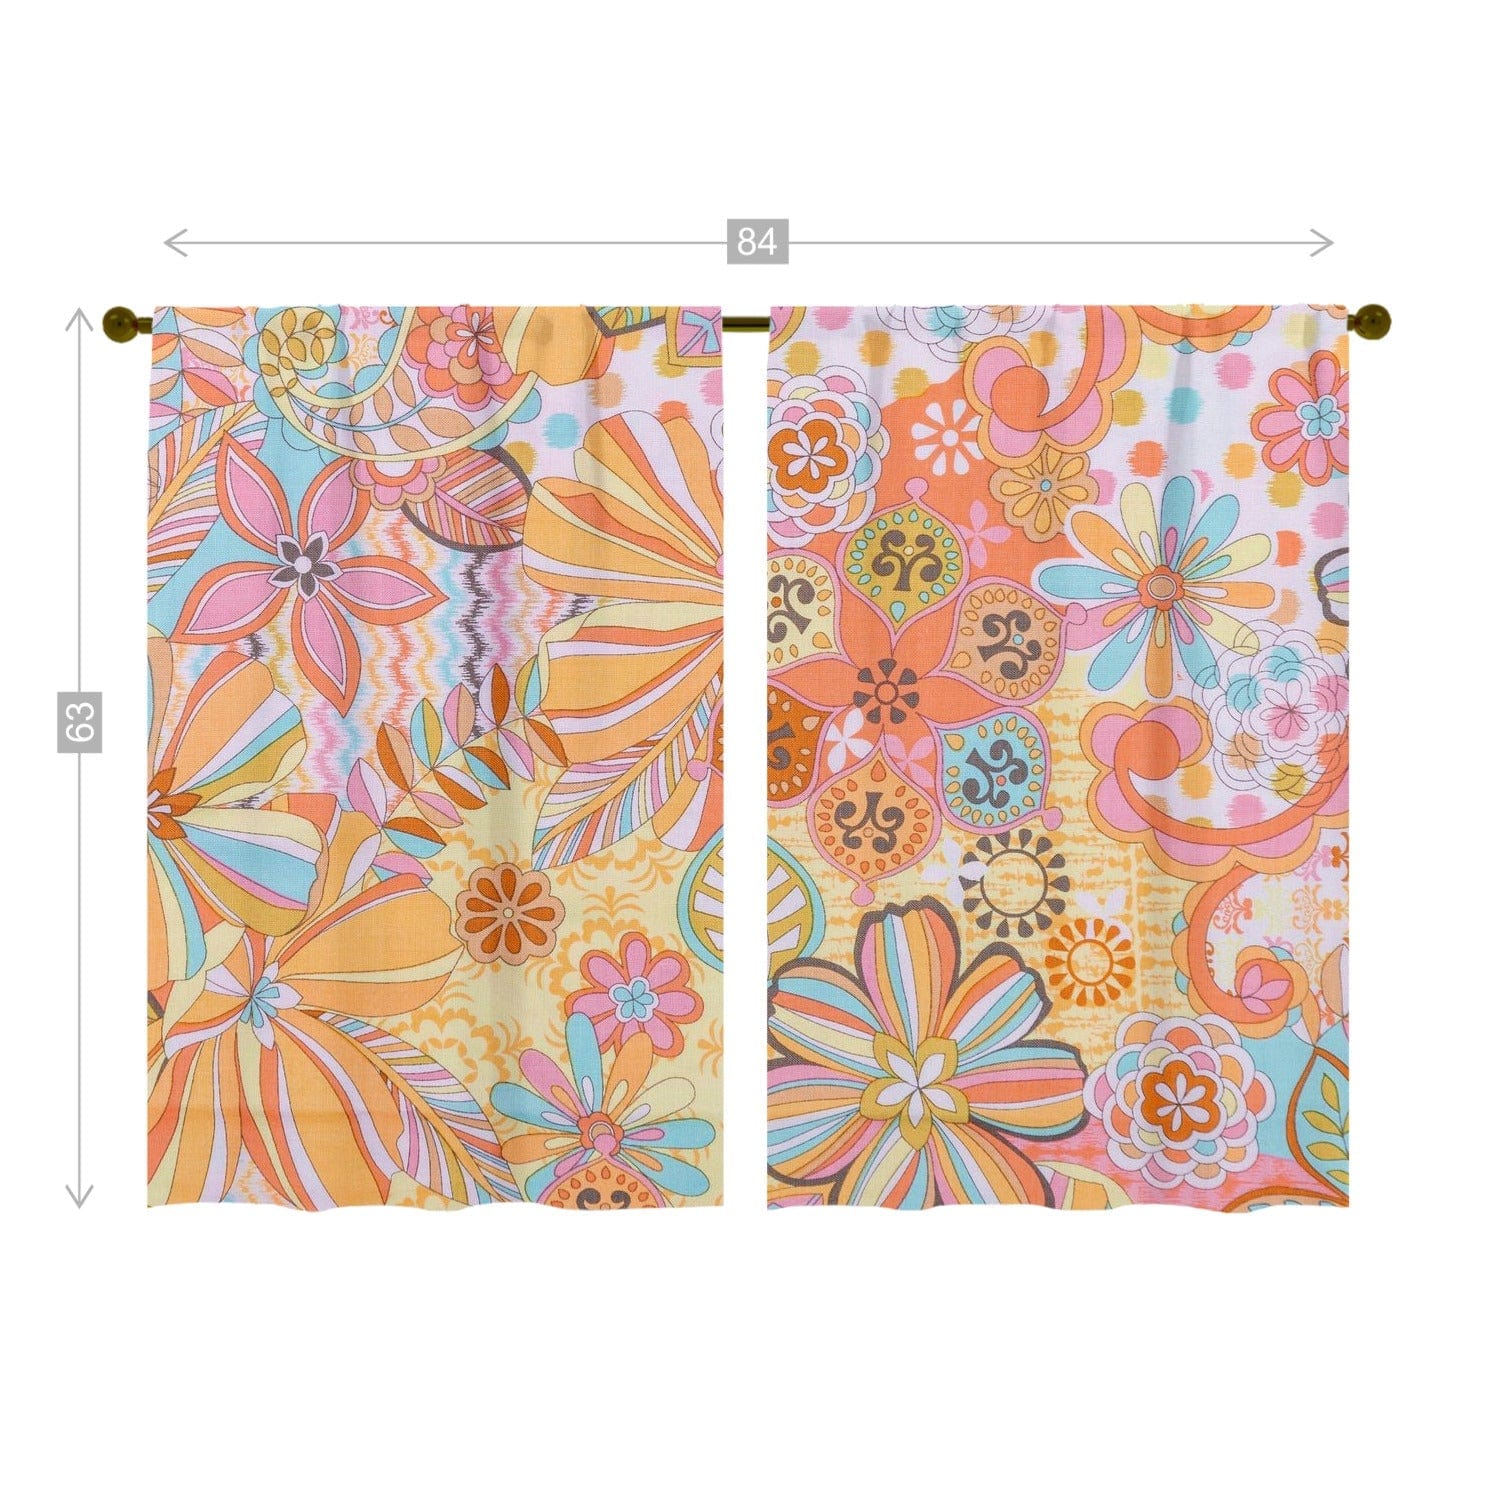 Retro Livingroom, Bedroom, Kitchen, Pink Paisley, Flower Power, Mid Mod Window Curtains (two panels) Curtains